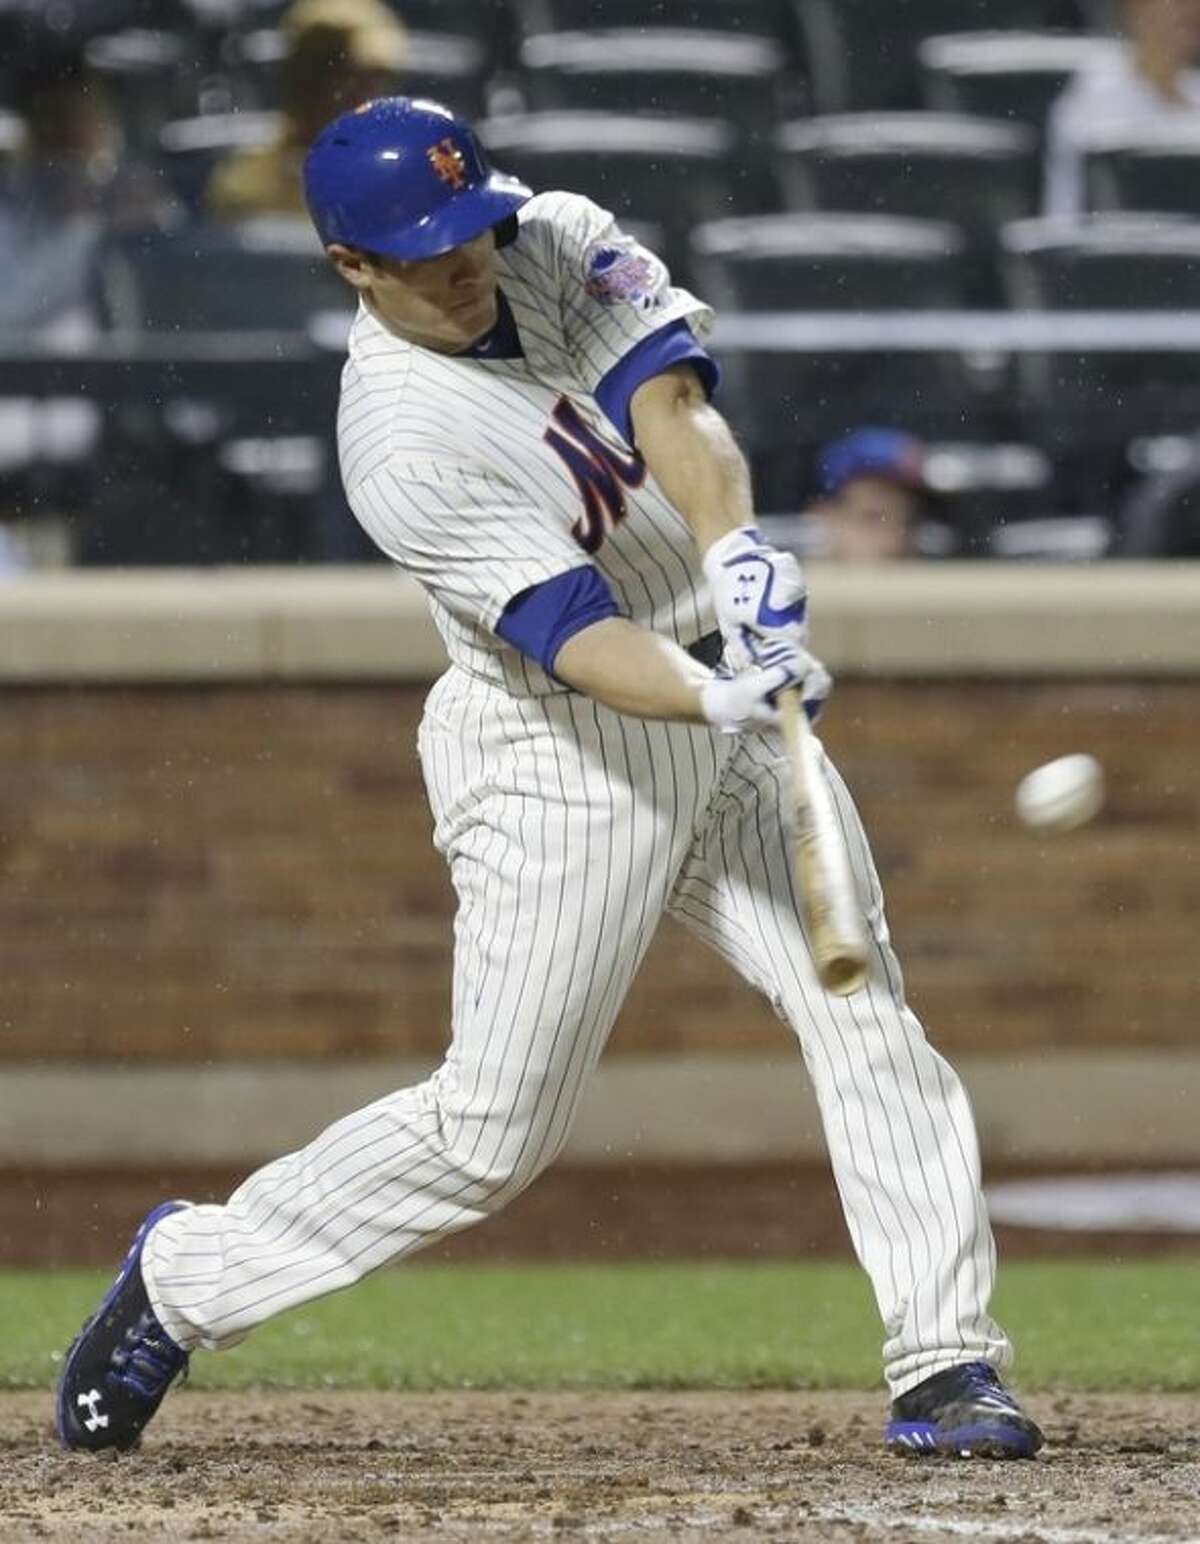 New York Mets' Anthony Recker hits a home run during the fifth inning of a baseball game against the Arizona Diamondbacks Tuesday, July 2, 2013, in New York. (AP Photo/Frank Franklin II)